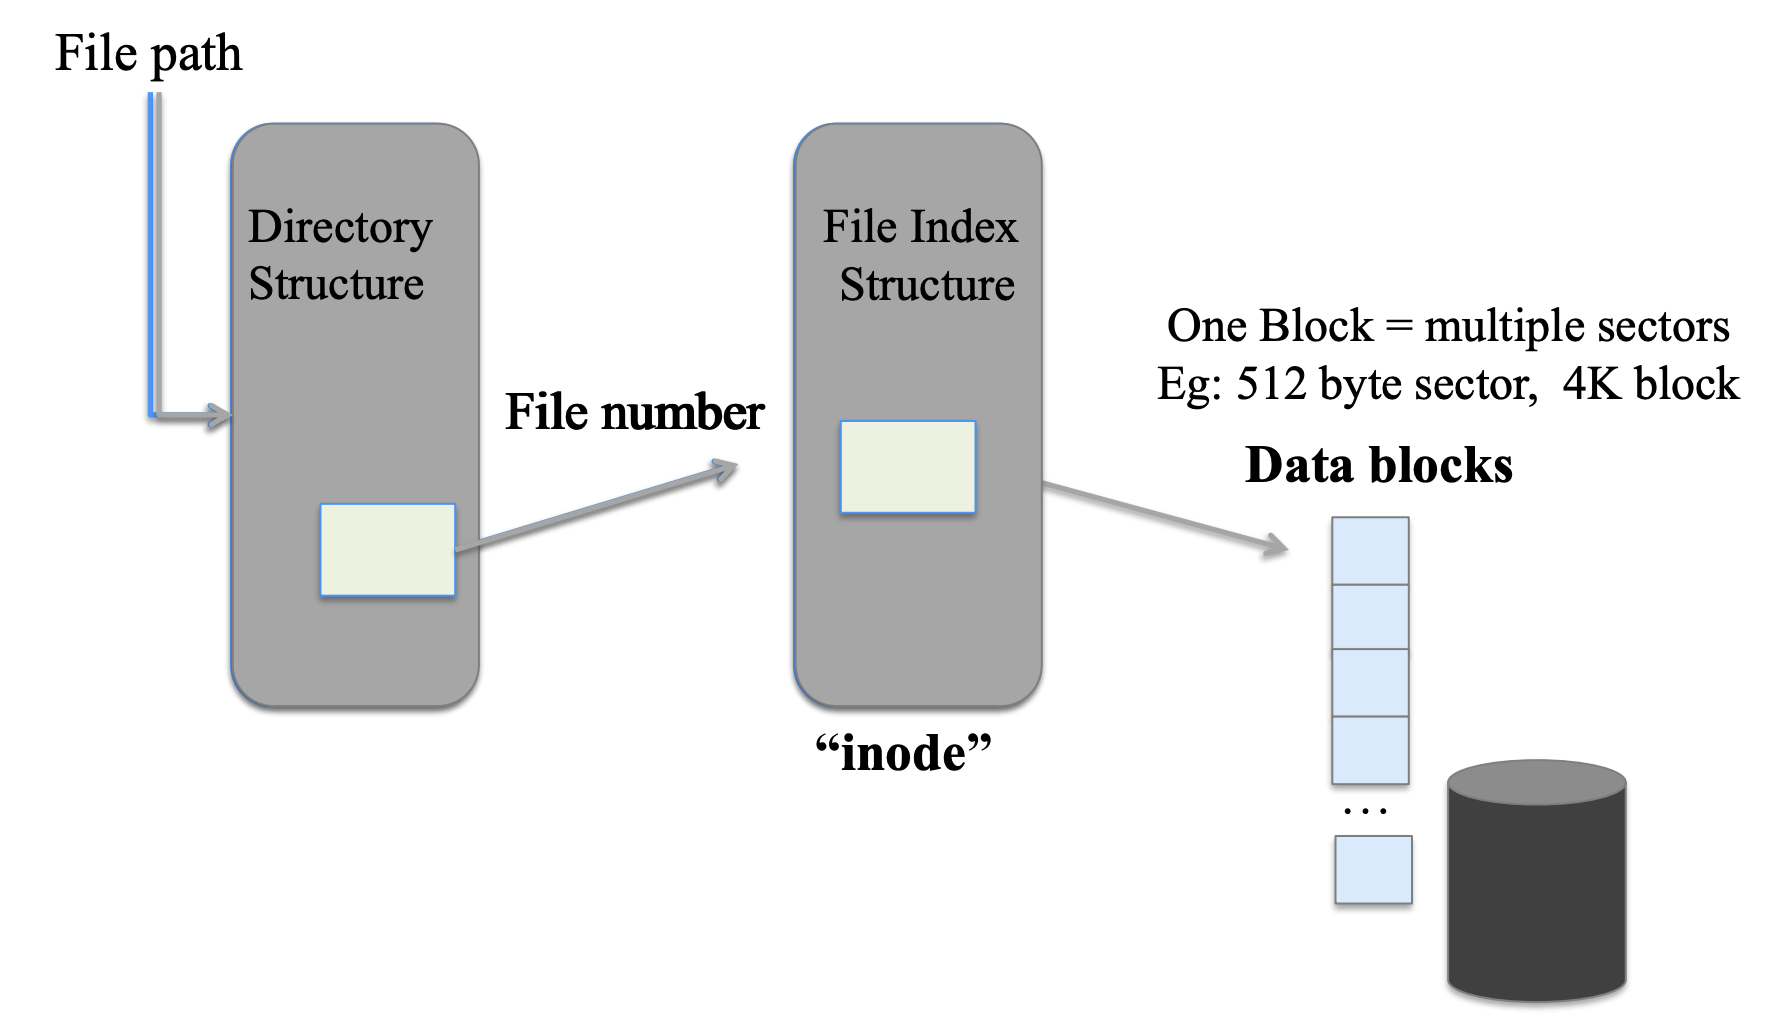 Components of a File System